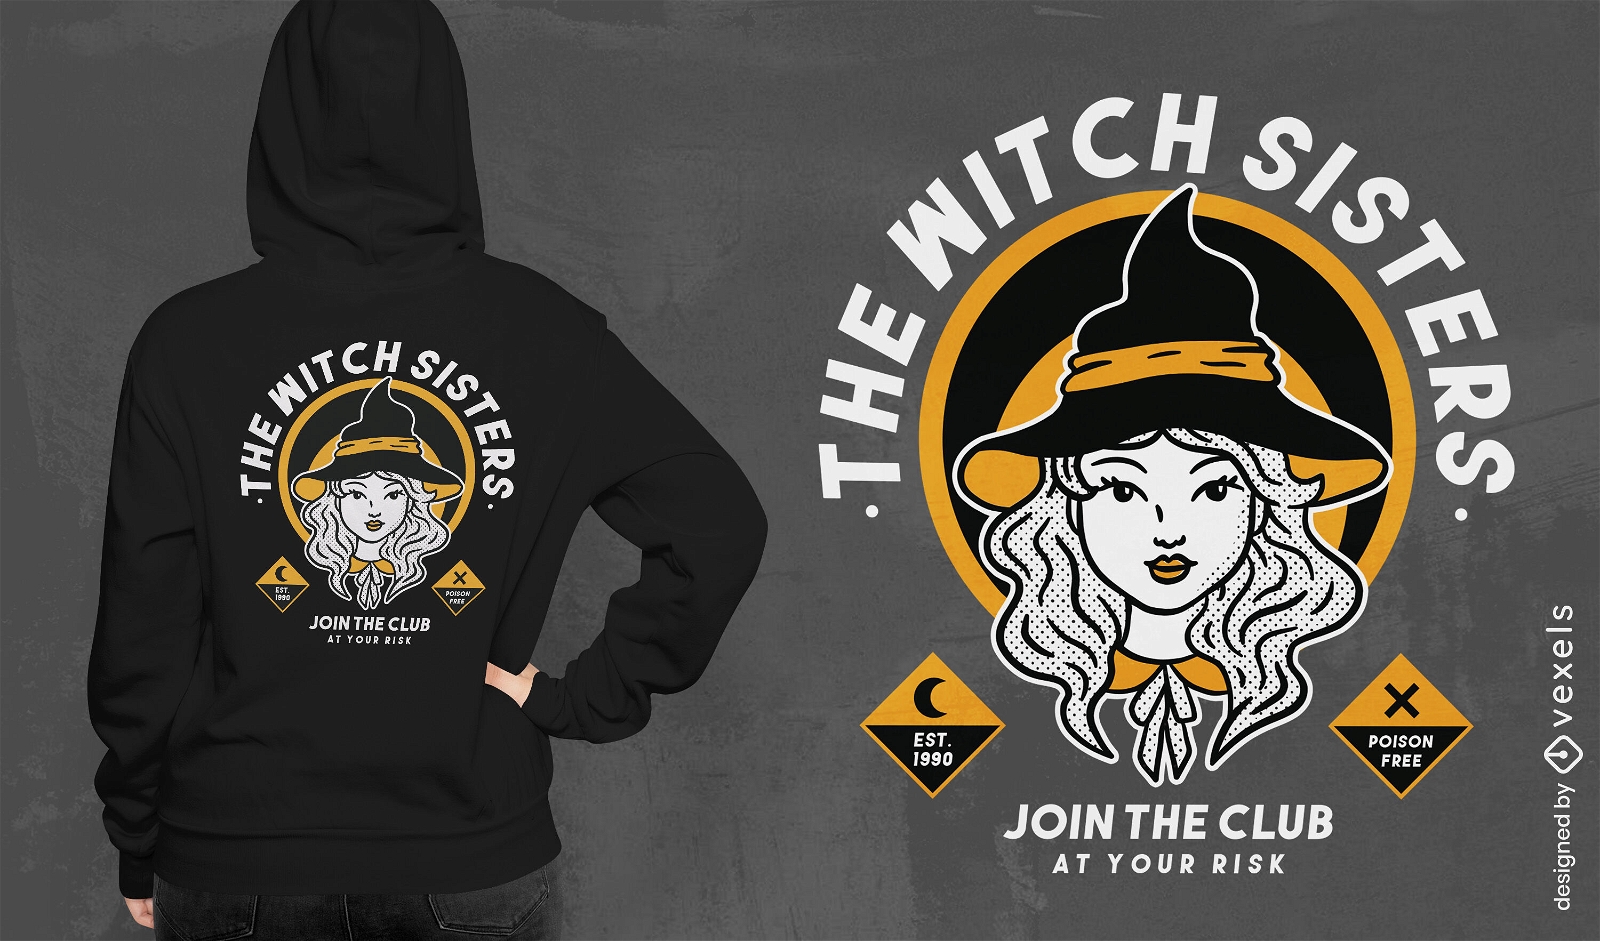 Witch sisters club t-shirt design